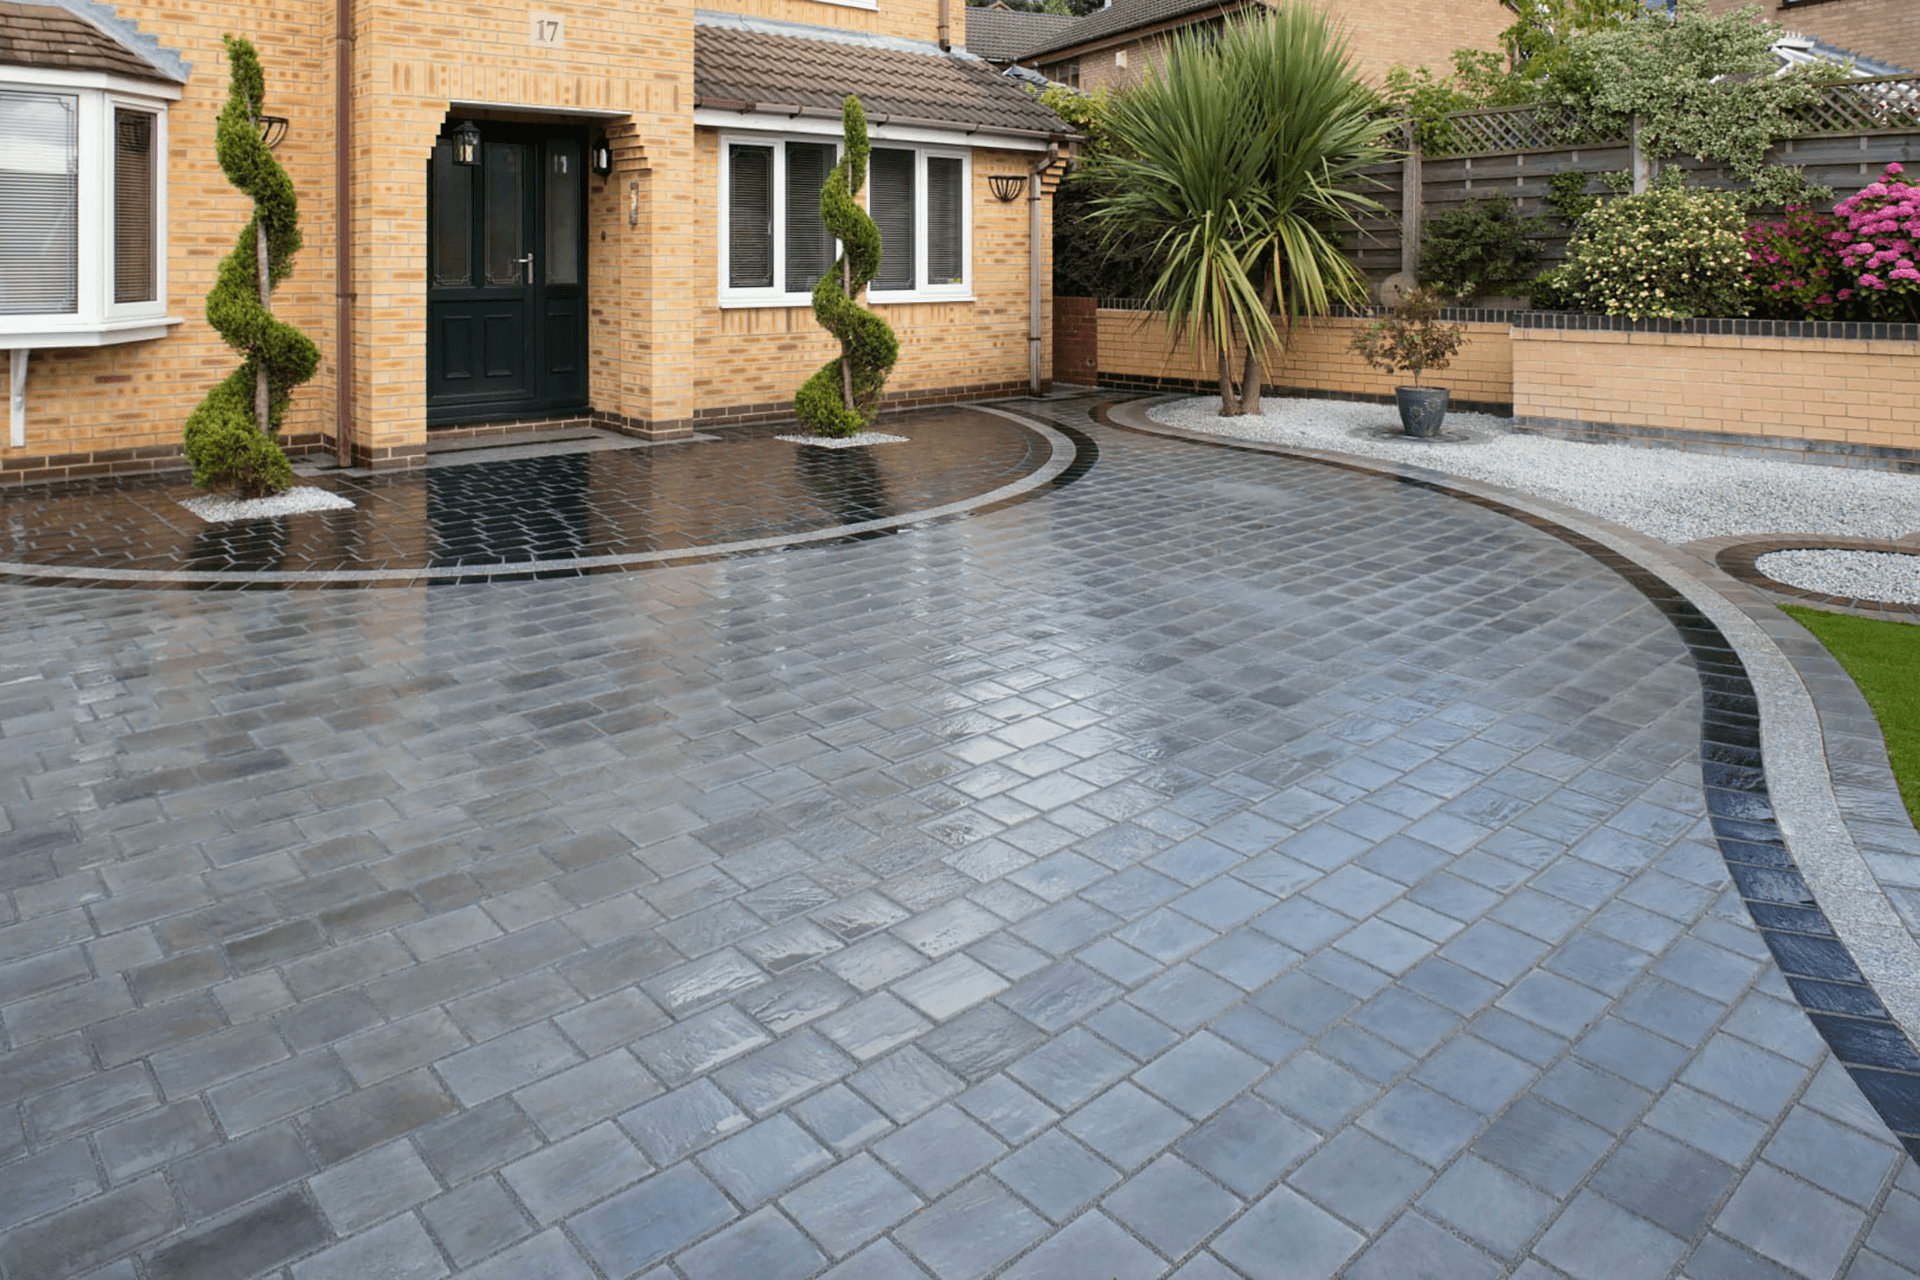 Driveway project completed by Bluestone Construction Cardiff